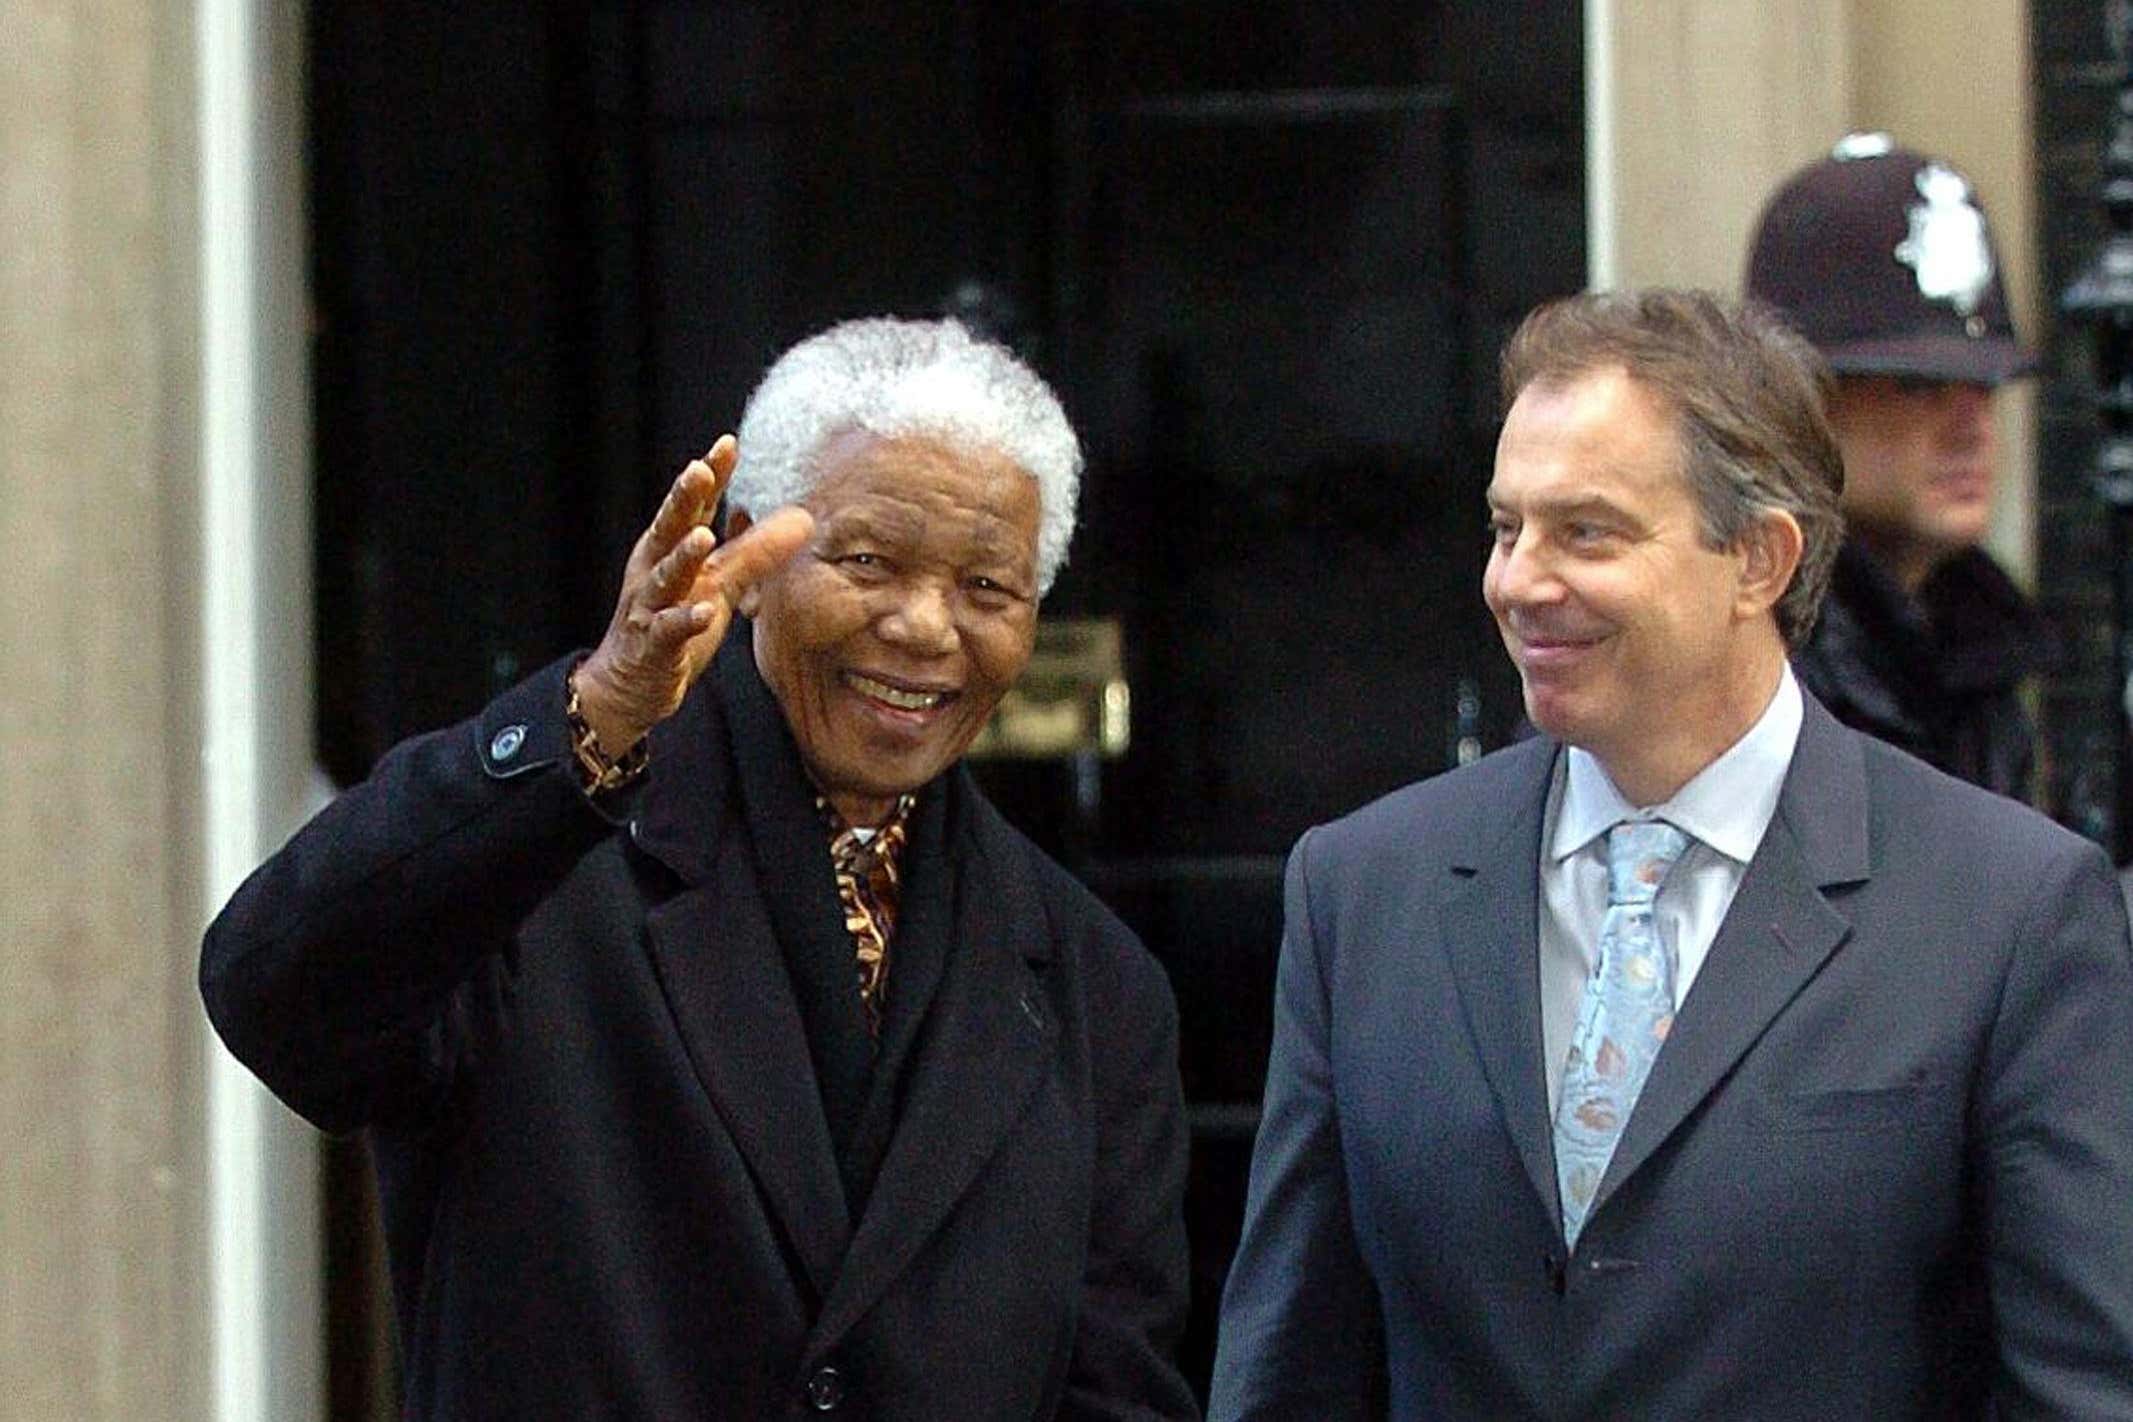 Nelson Mandela, pictured with Tony Blair in 1997, appears on our list of royalty who became elected leaders